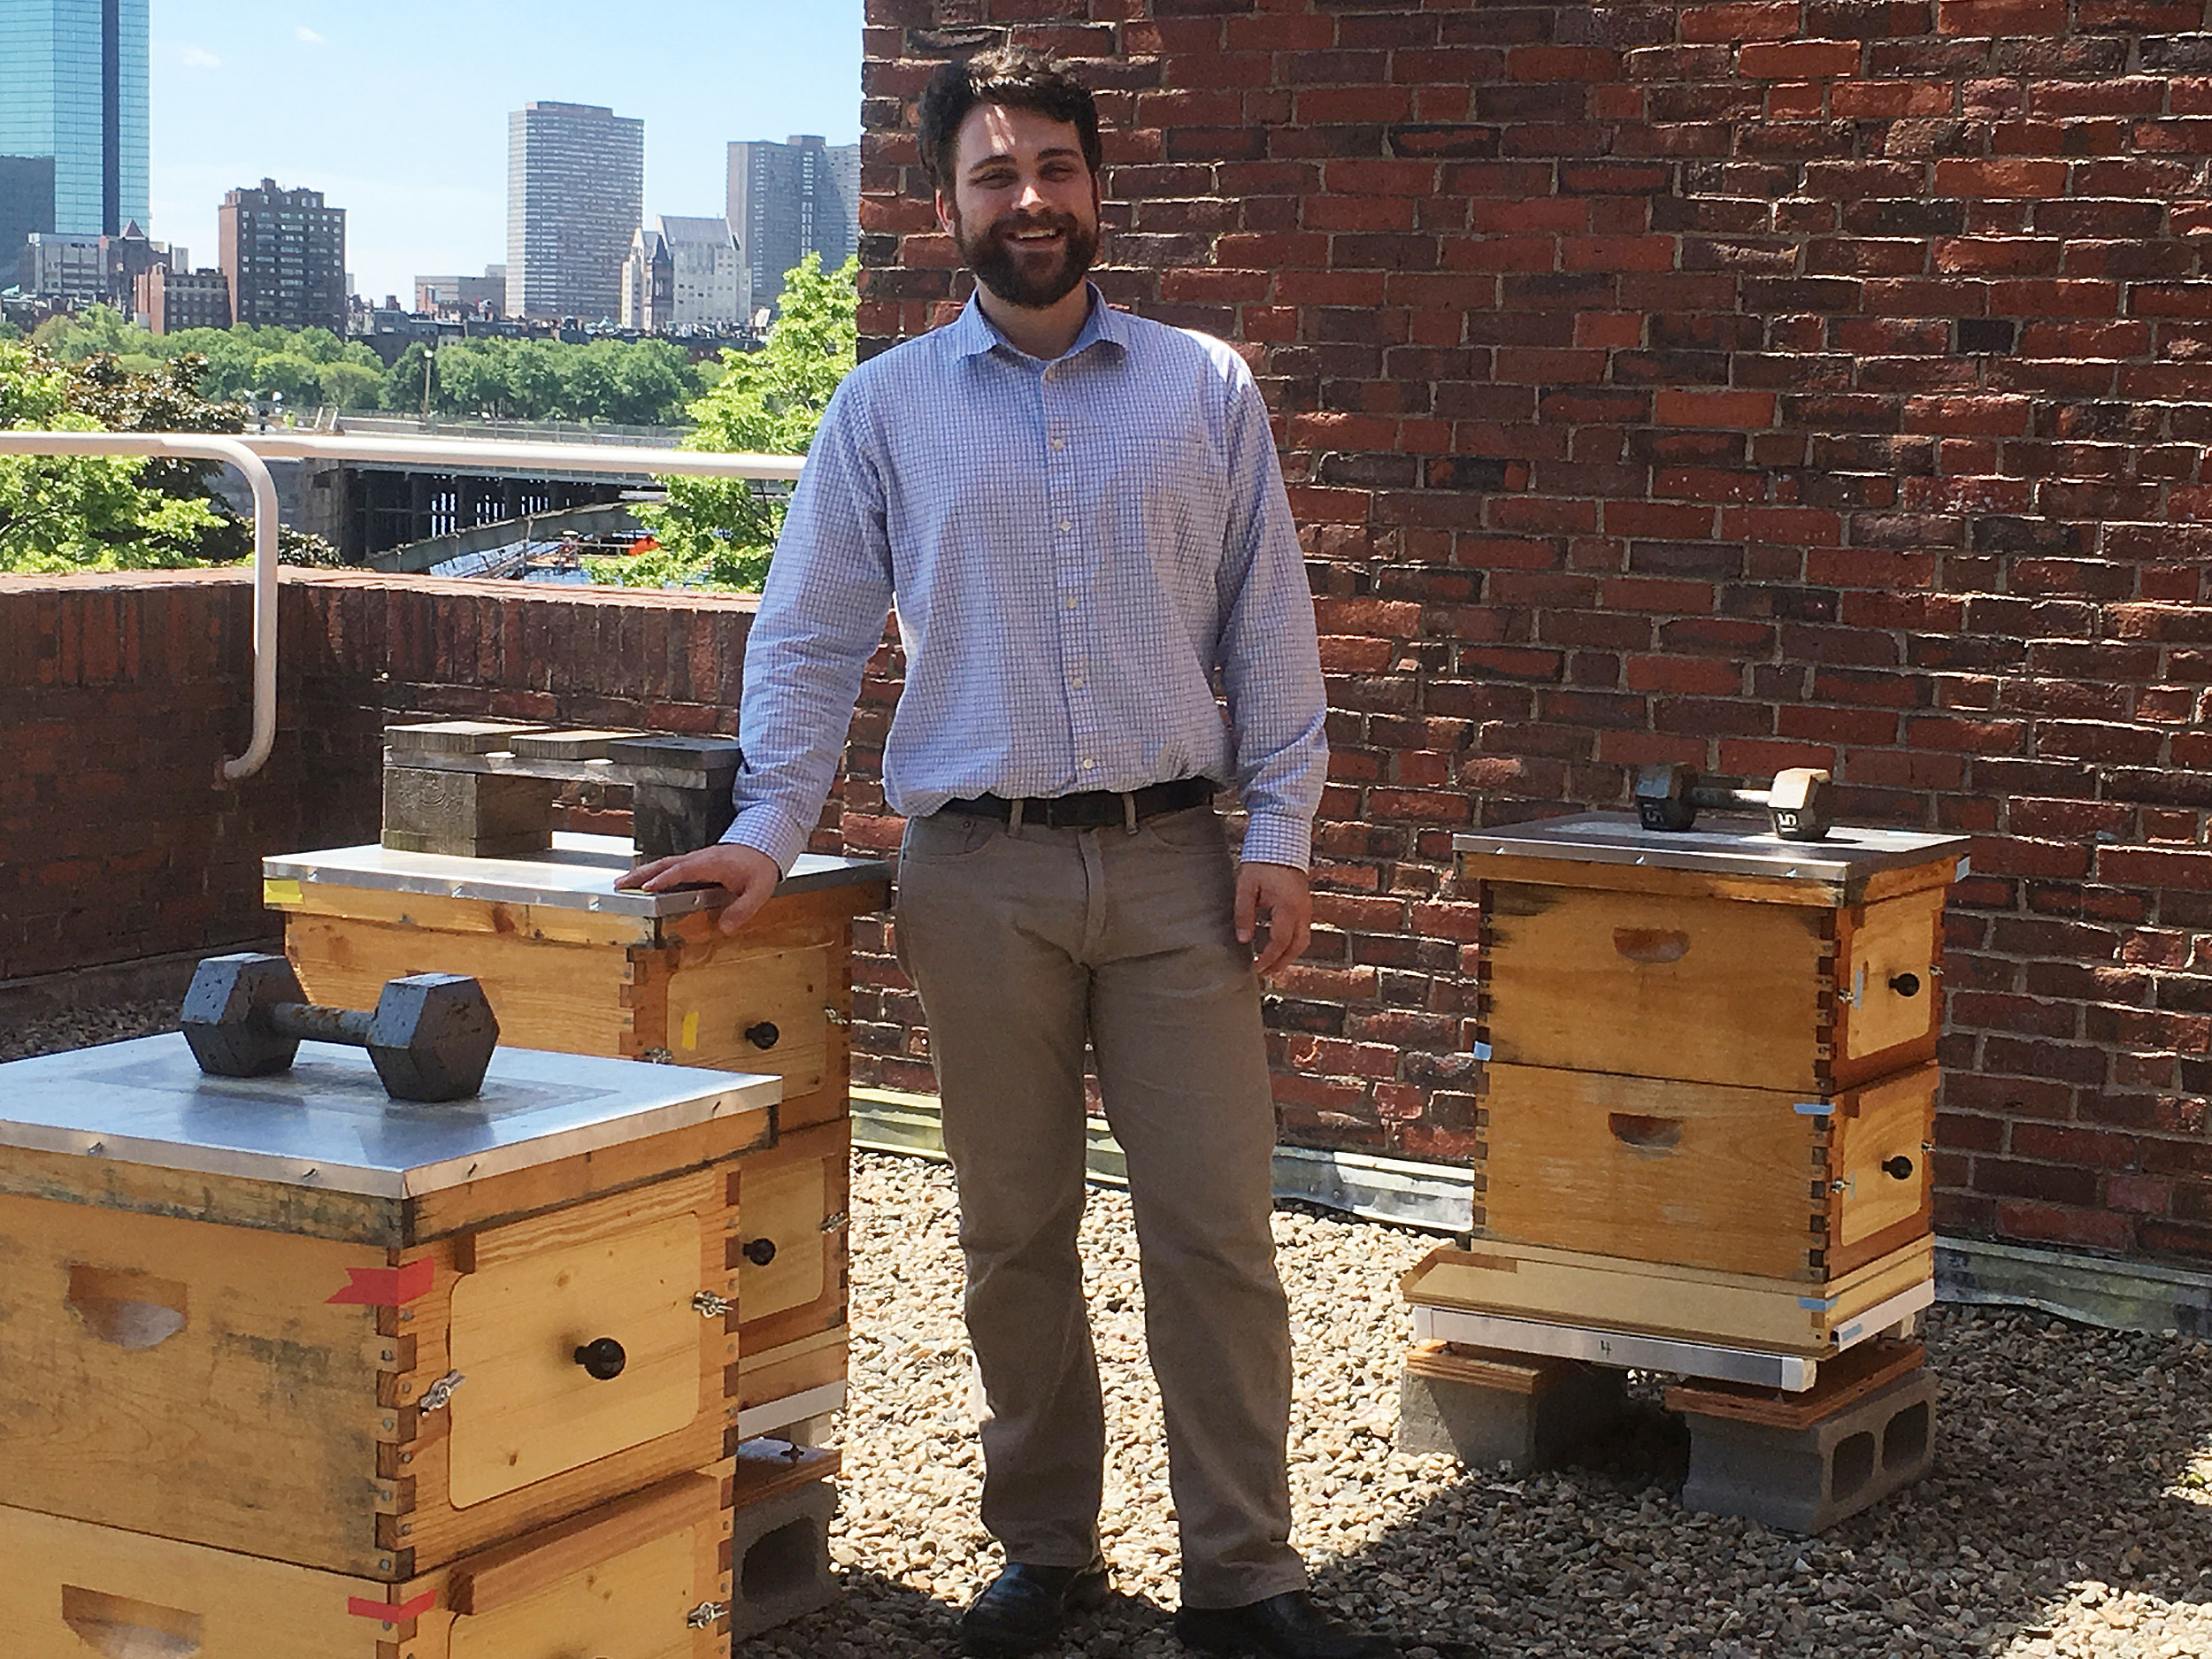 Researcher on roof with beehives.